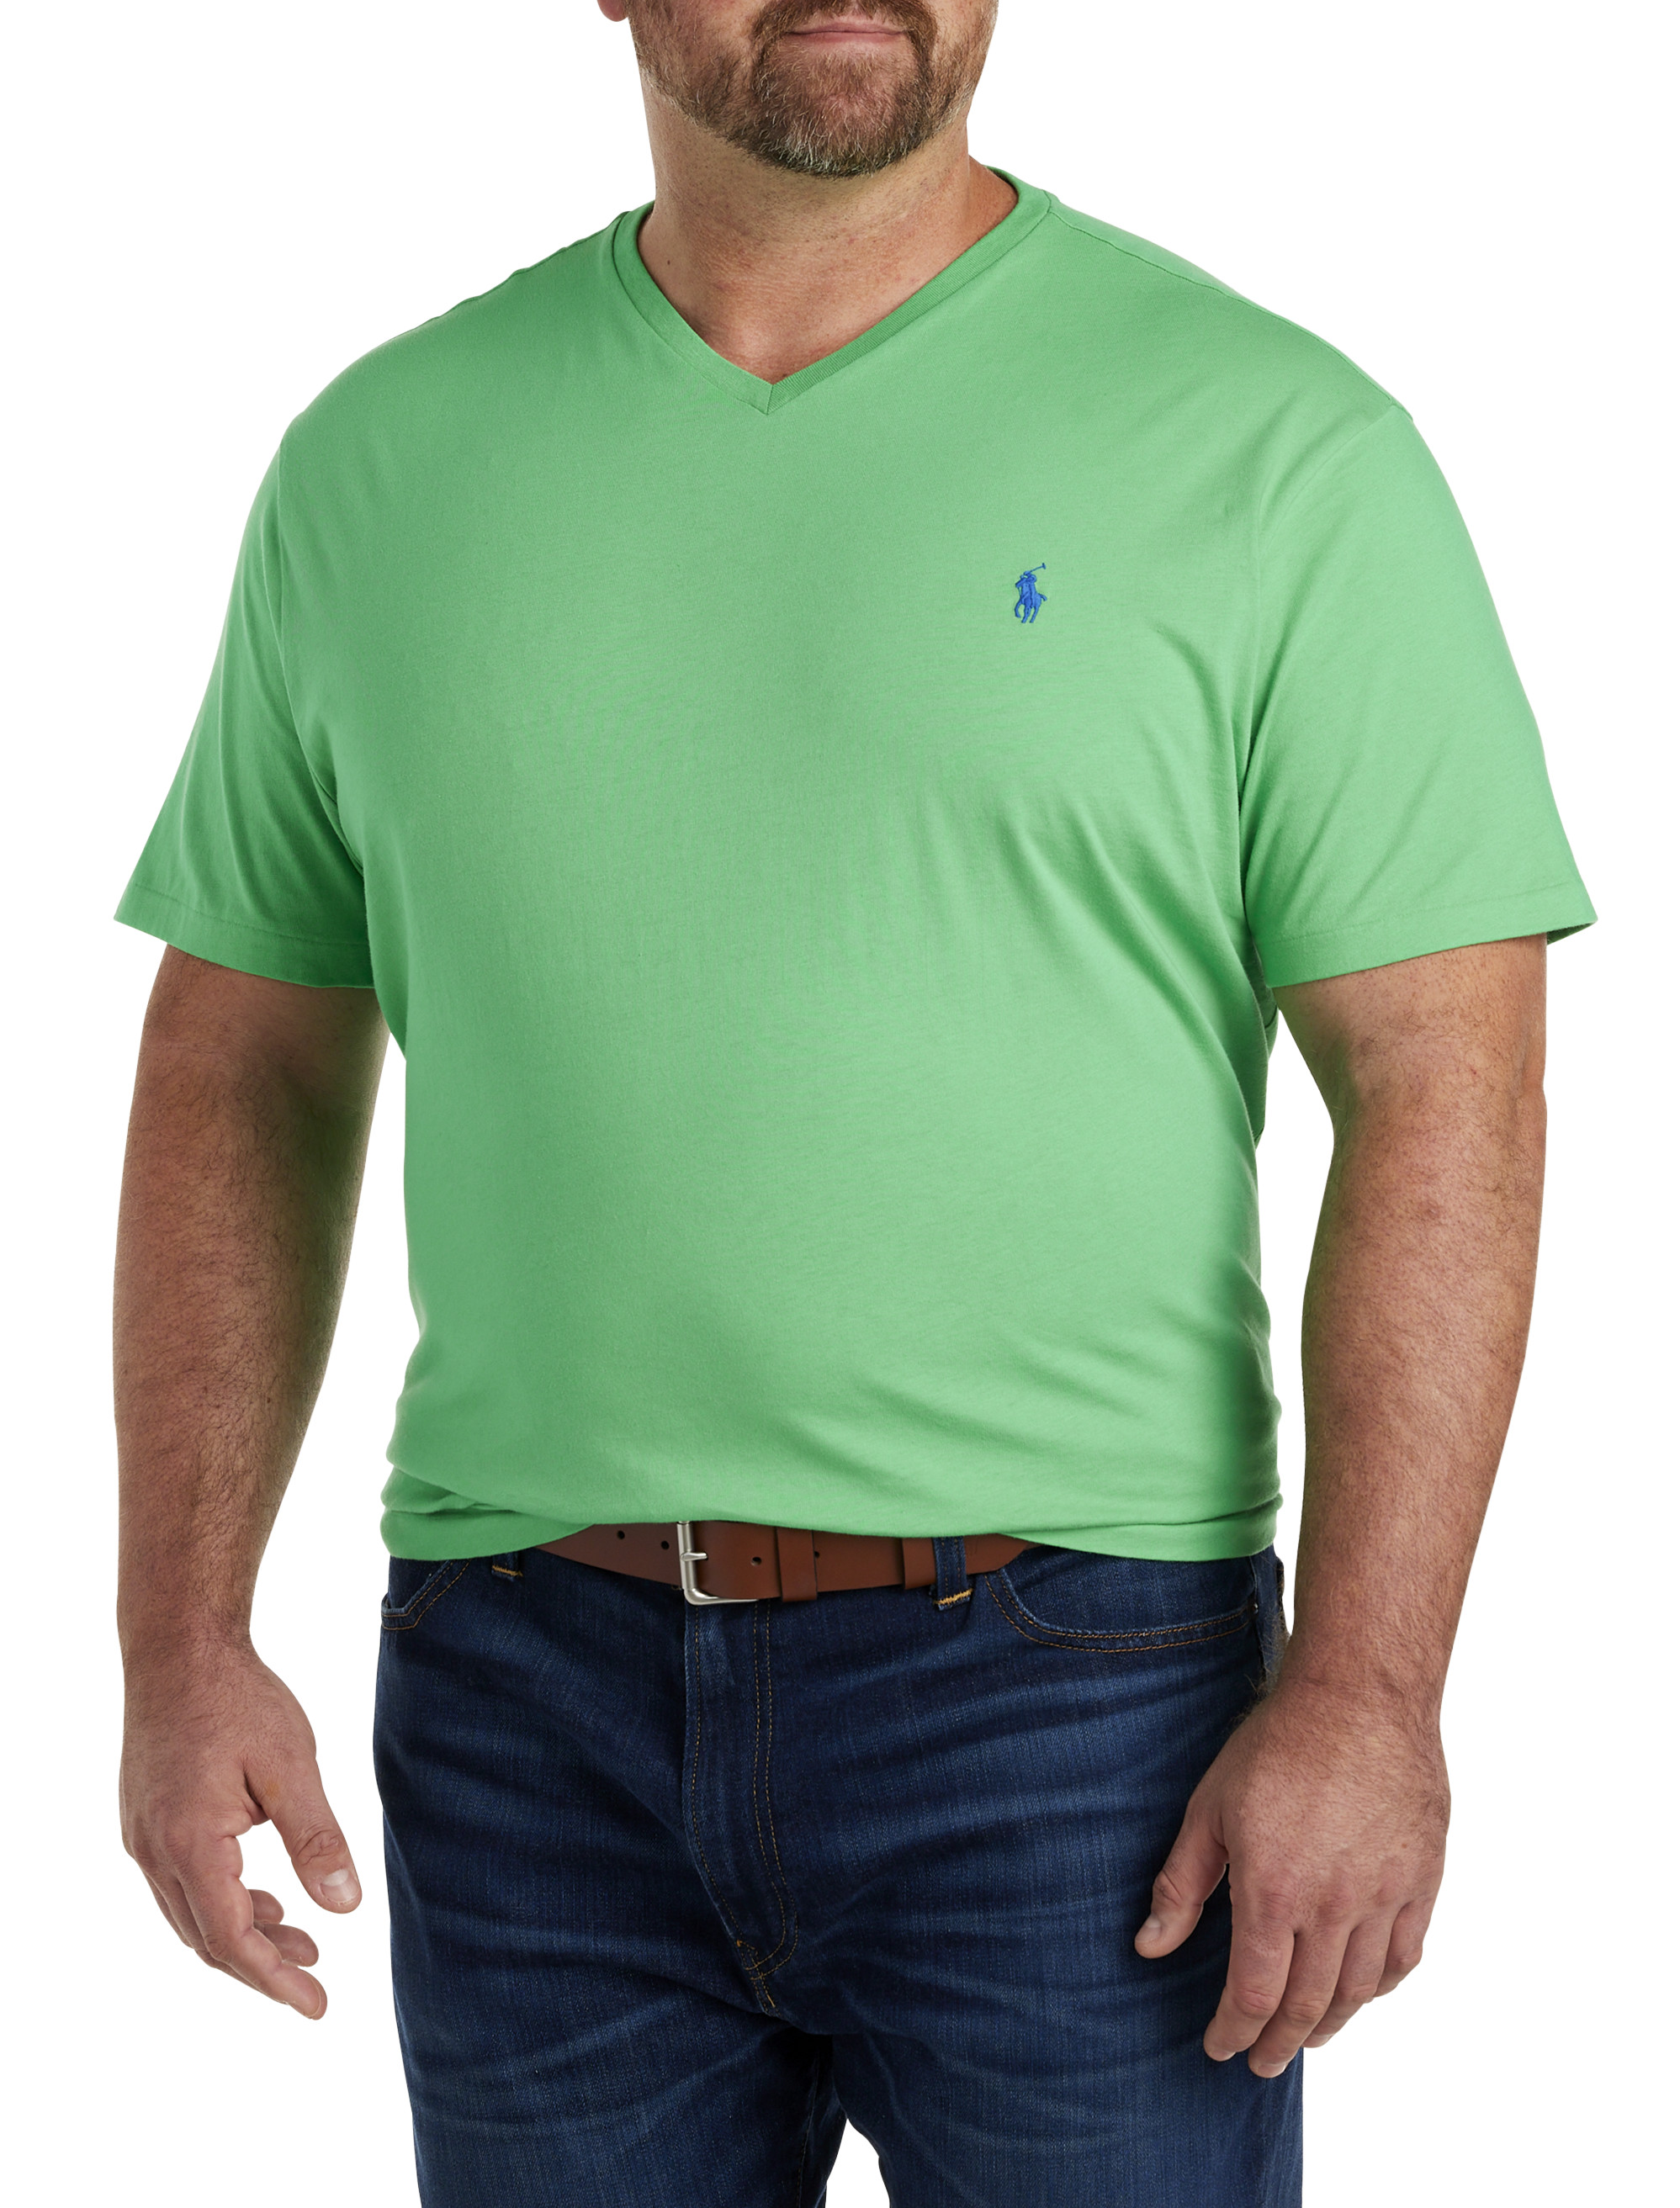 https://images.dxl.com/is/image/CasualMale/pR8666course_green?$product$